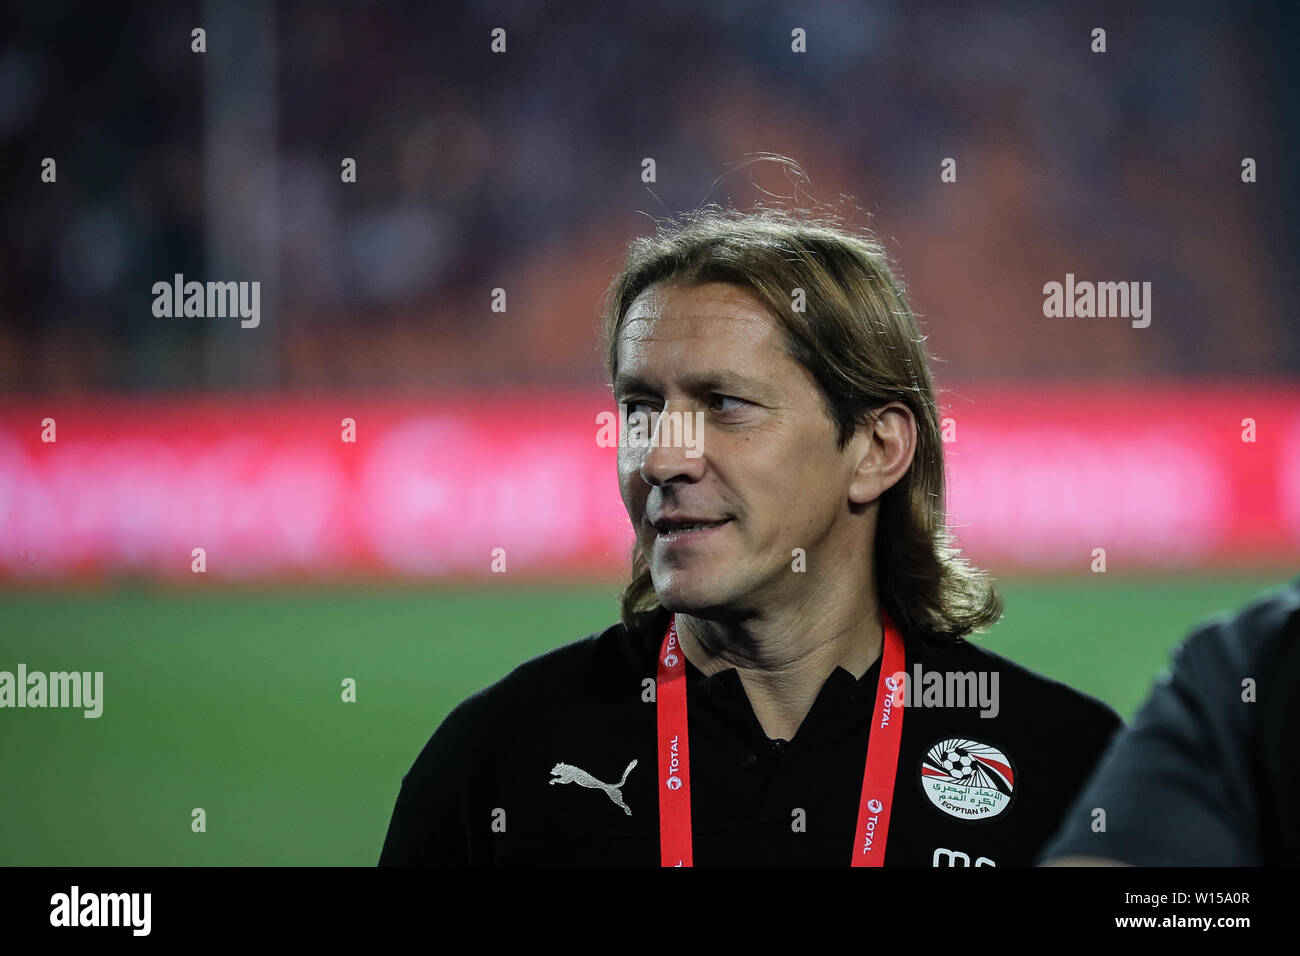 Cairo, Egypt. 30th June, 2019. Egypt assistant coach Michel Salgado is pictured prior to the start of the 2019 Africa Cup of Nations Group A soccer match between Egypt and Uganda at Cairo International Stadium. Credit: Omar Zoheiry/dpa/Alamy Live News Stock Photo